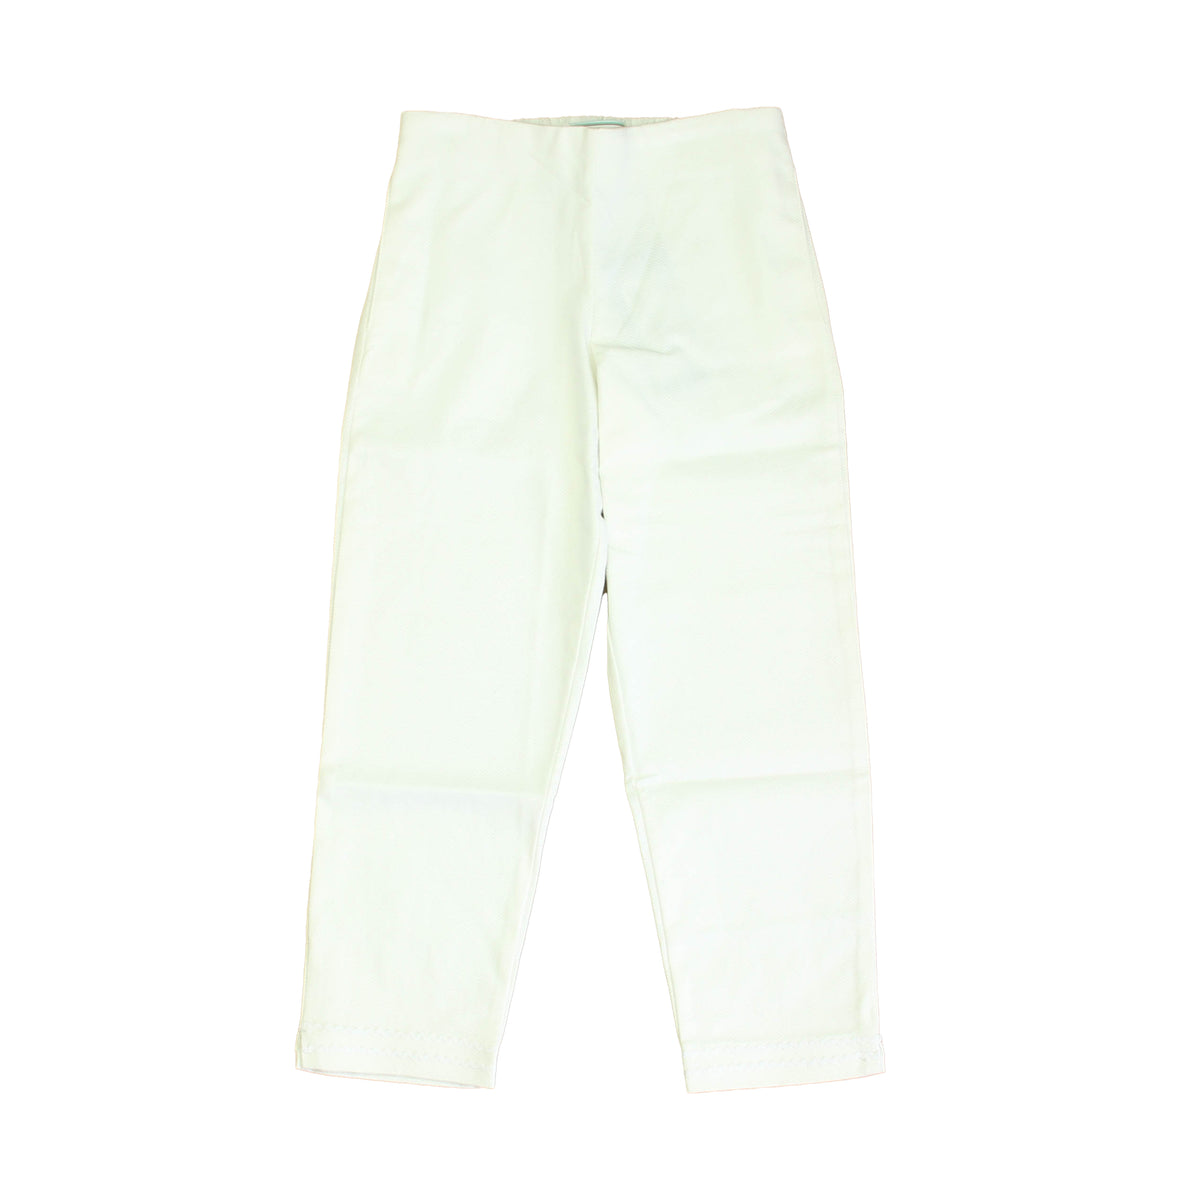 New with Tags: White Pants size: 6-14 Years -- FINAL SALE